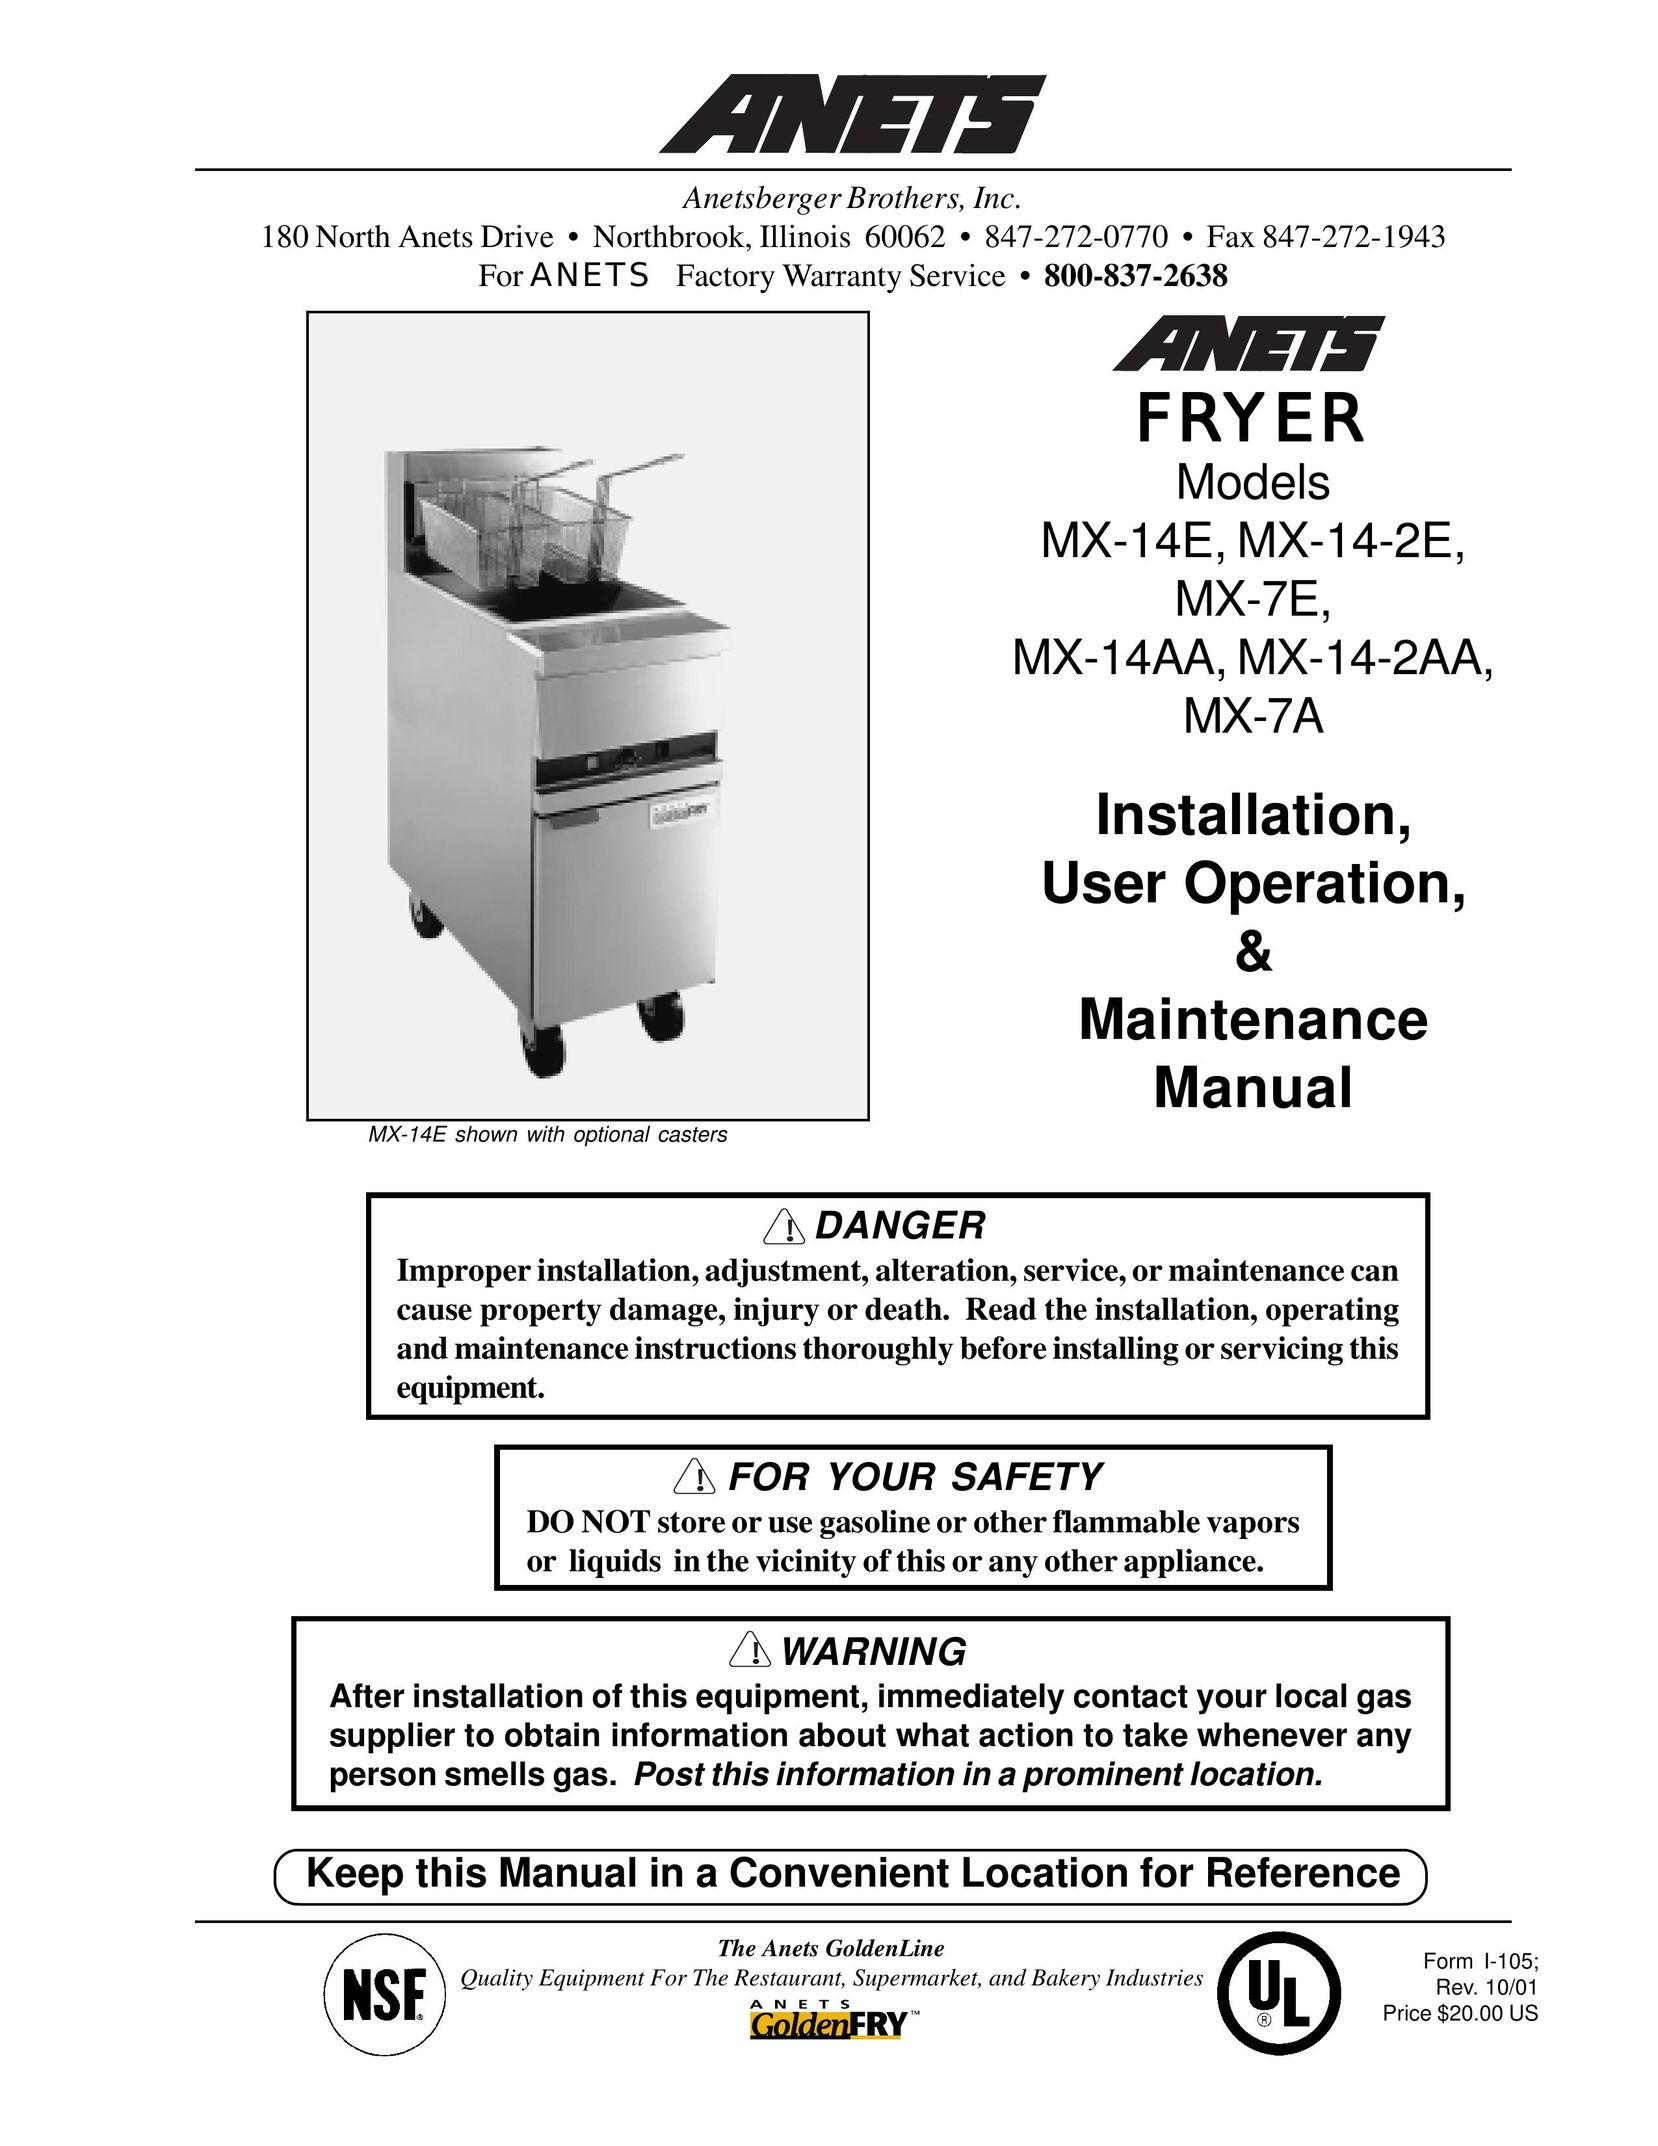 Anetsberger Brothers MX-14E Fryer User Manual